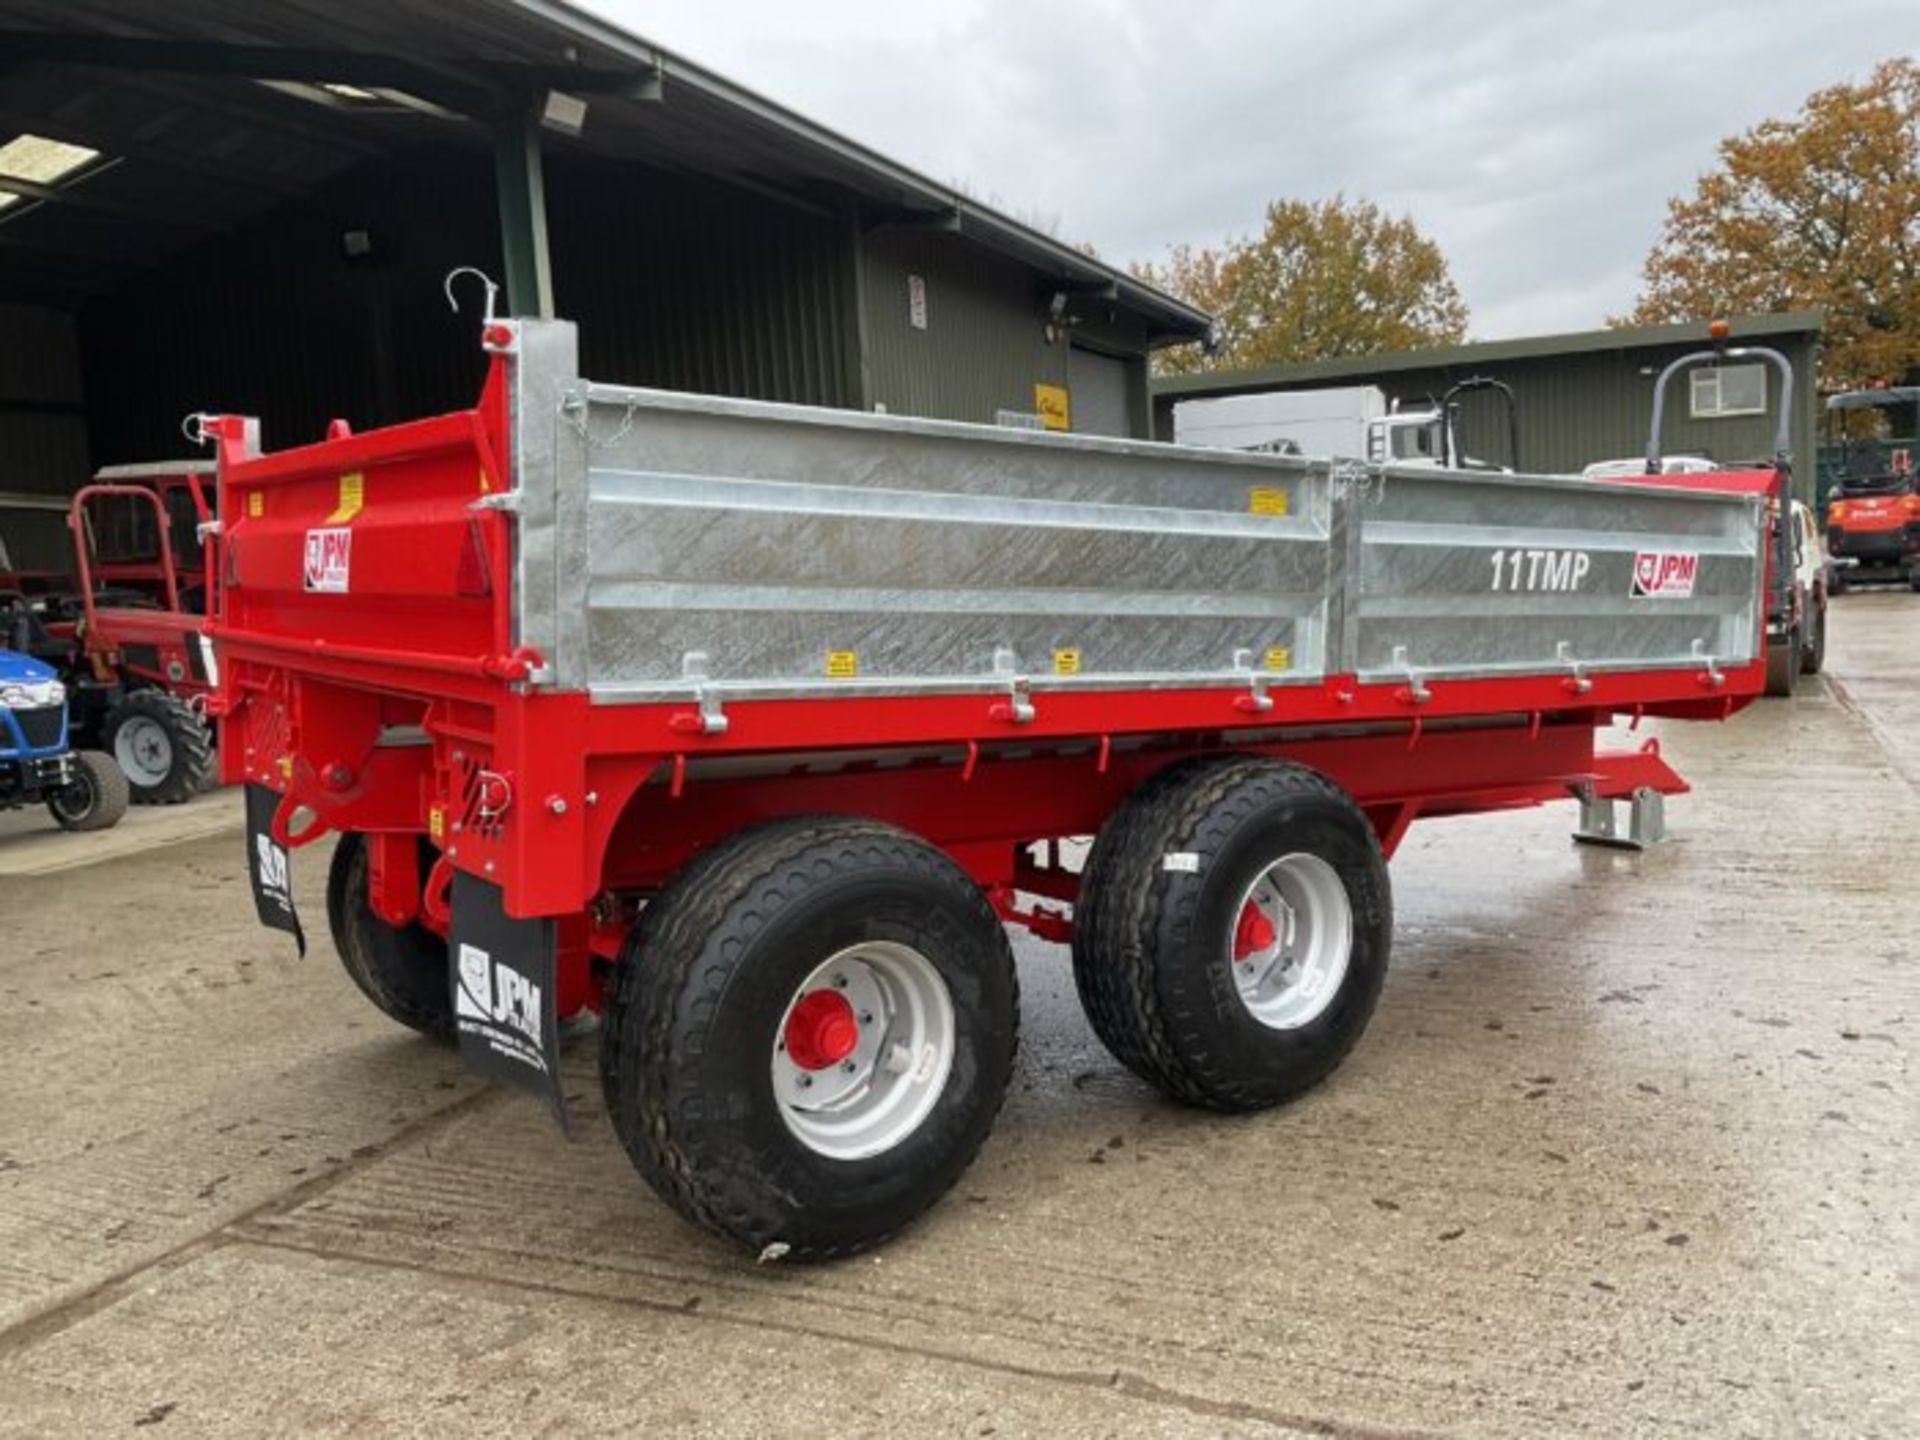 JPM 11 TMP. 11 TONNE MULTI PURPOSE TRAILER. DROP SIDE. WITH RAMPS. - Image 6 of 8